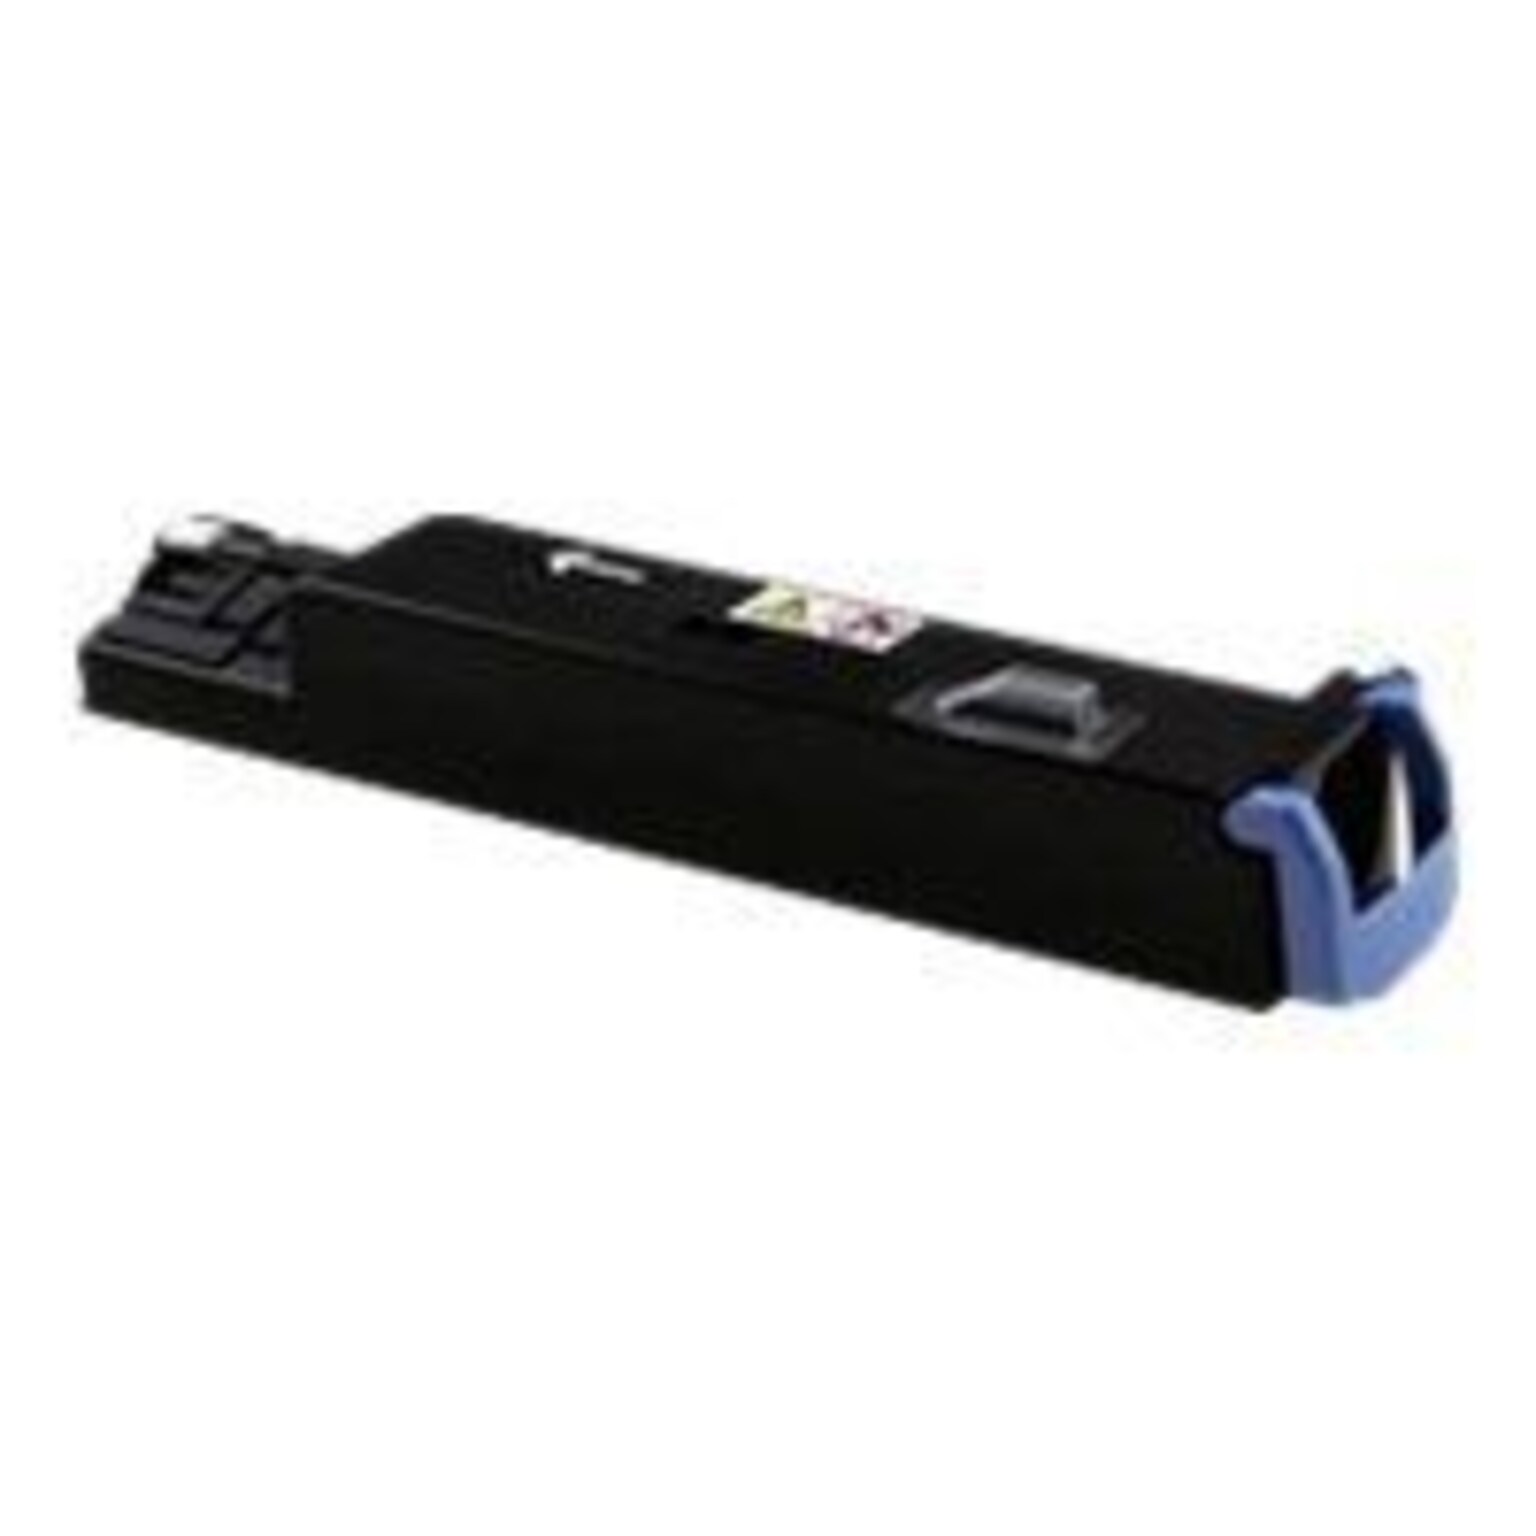 Dell  U162N Black High Yield Toner Waste Container for 5130cdn/C5765dn Color Laser Printer